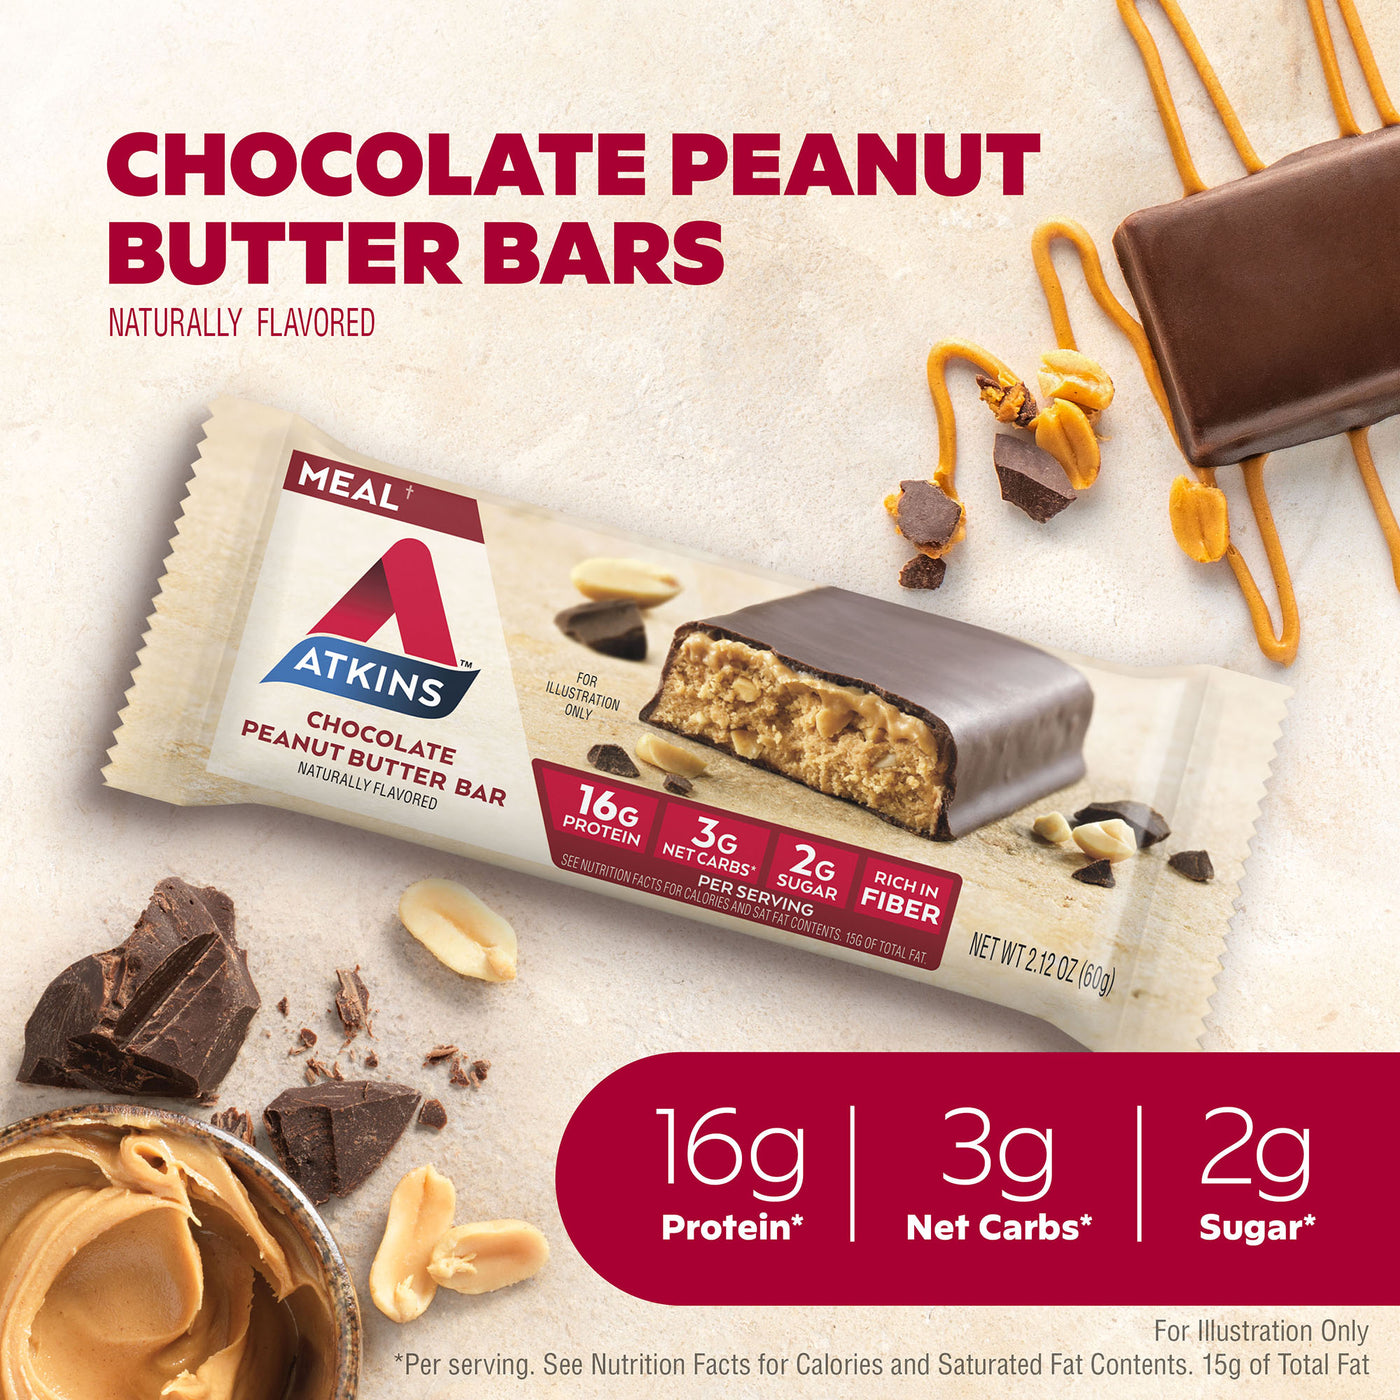 Chocolate Peanut Butter Bar with peanut, peanut butter and chocolate; naturally flavored 16G Protein*, 3G Net Carbs*, 2G Sugar*. For Illustration Only. *Per serving. See Nutrition Facts for Calories and Saturated Fat Contents. 15G of Total Fat